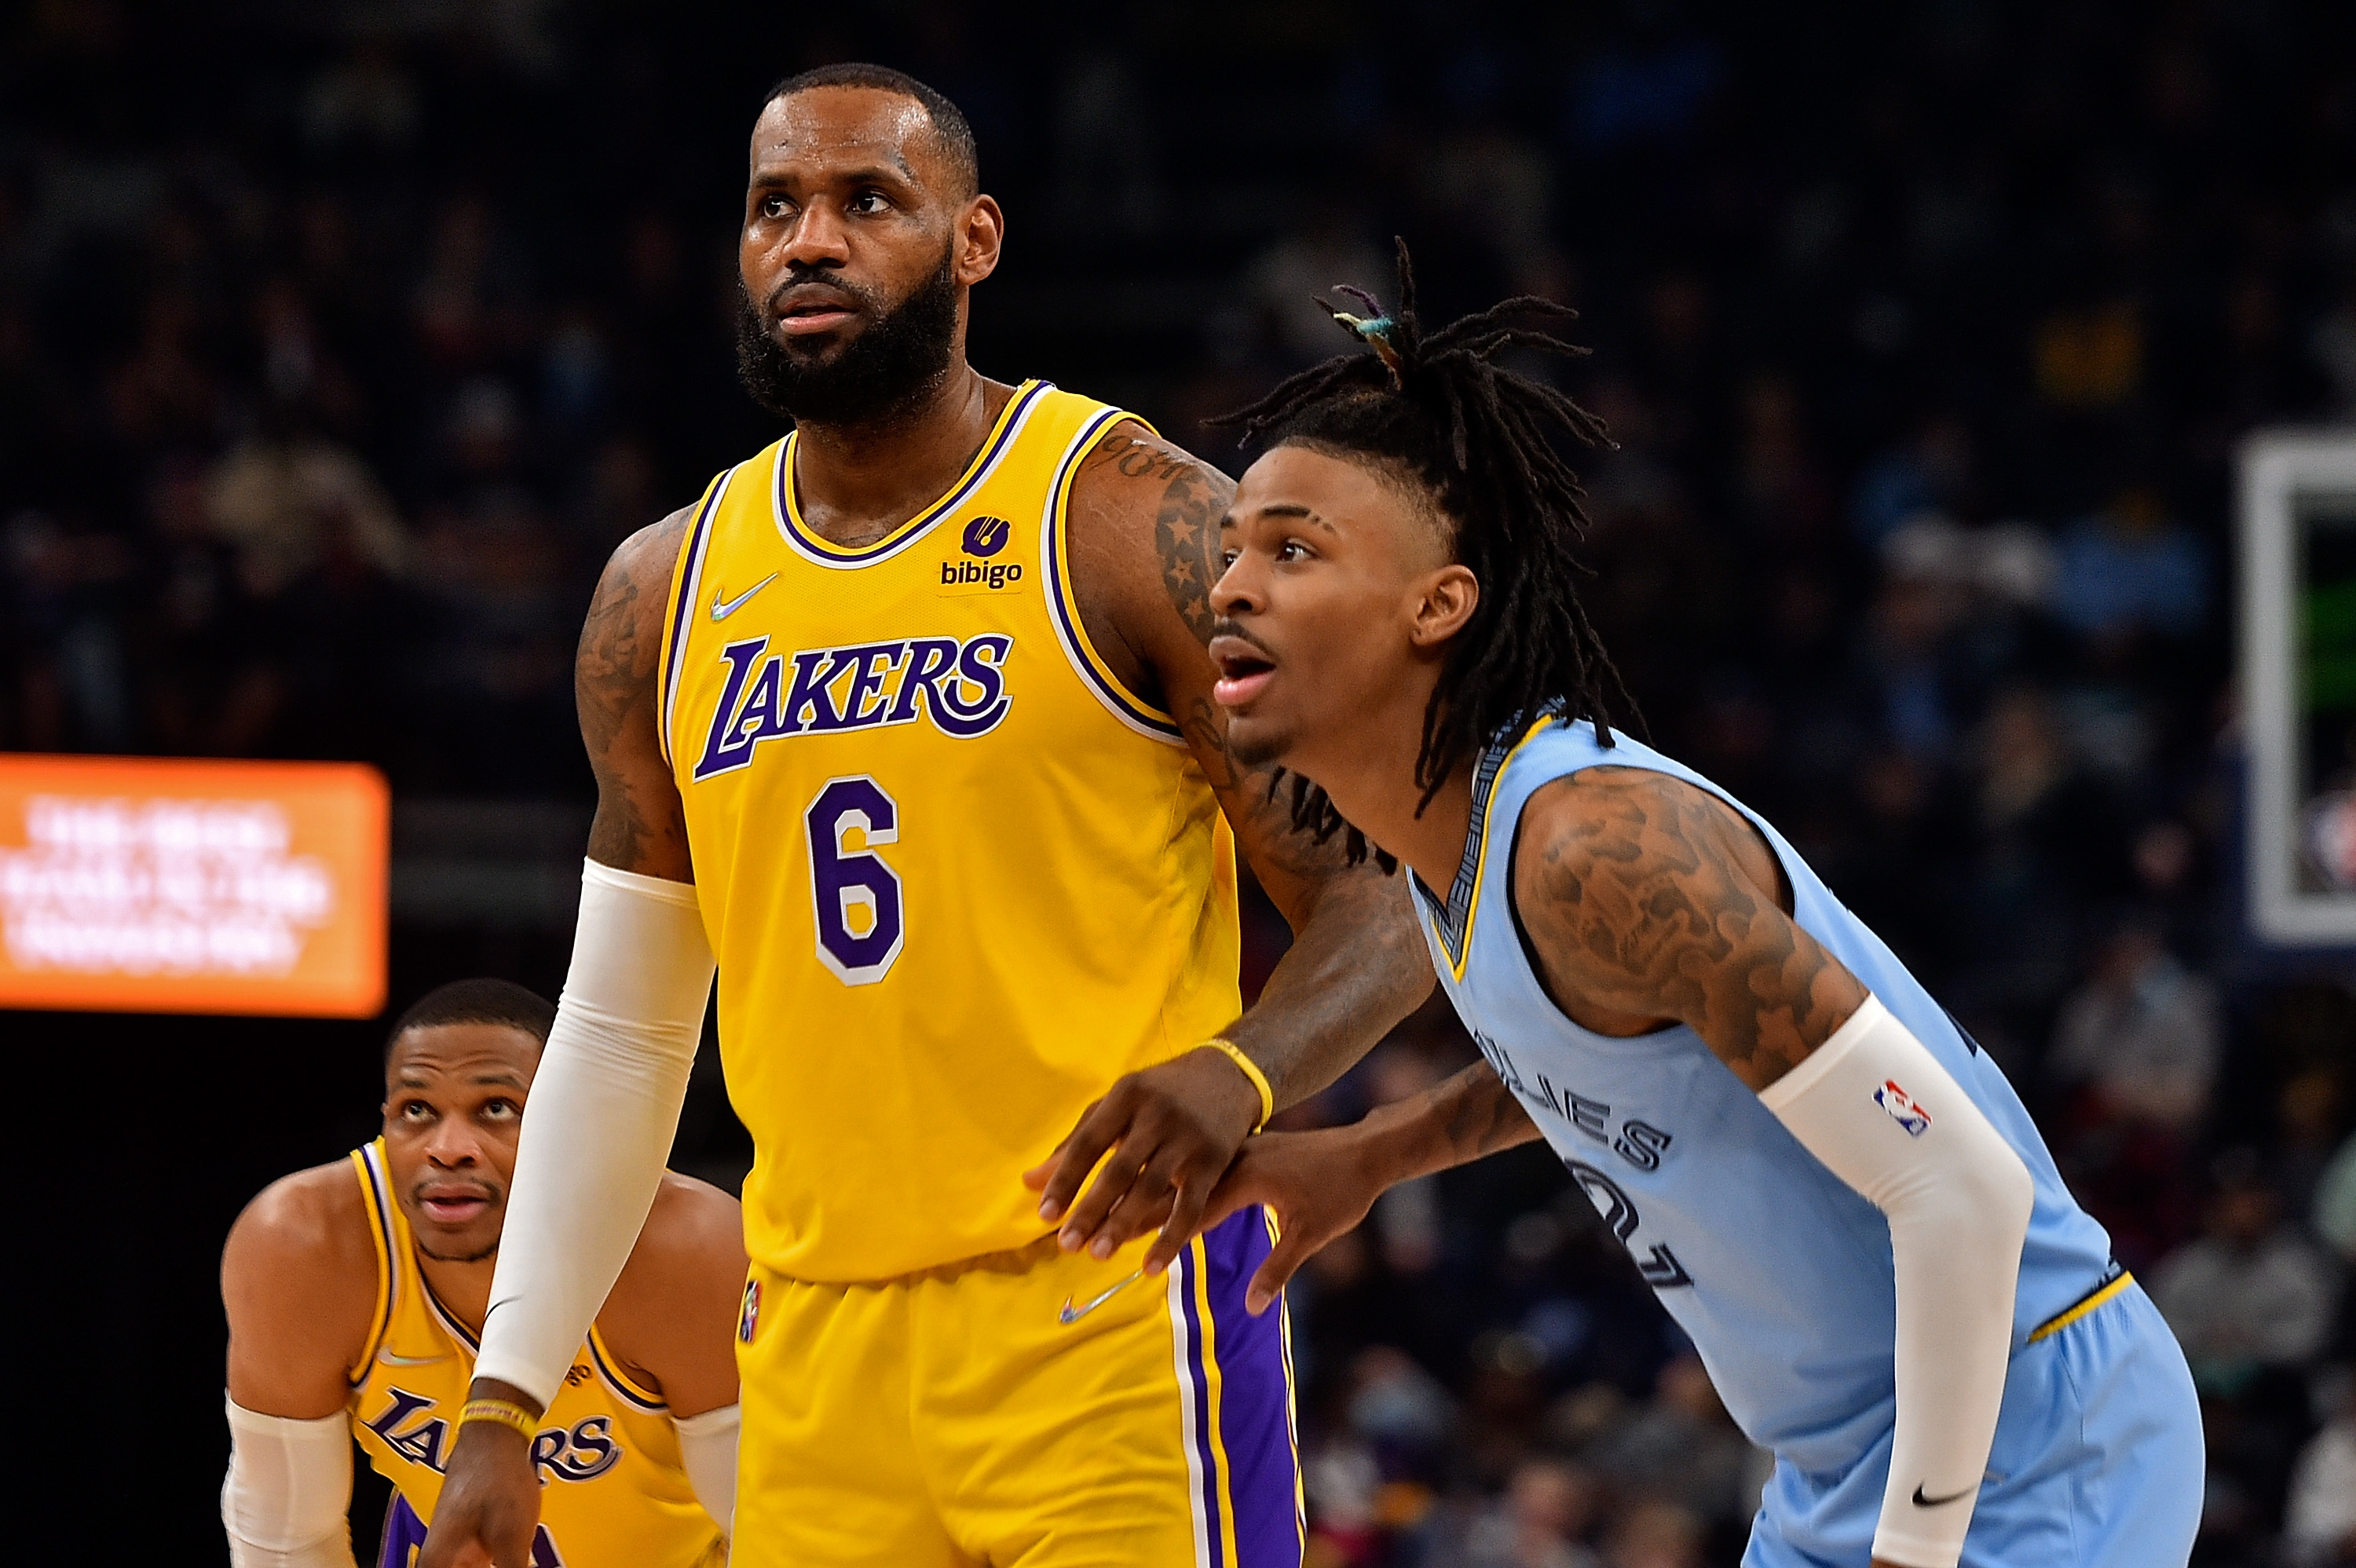 The guy's got rockets in his calf muscles - LeBron James lauds Ja Morant's  incredible block during the Memphis Grizzlies-LA Lakers game